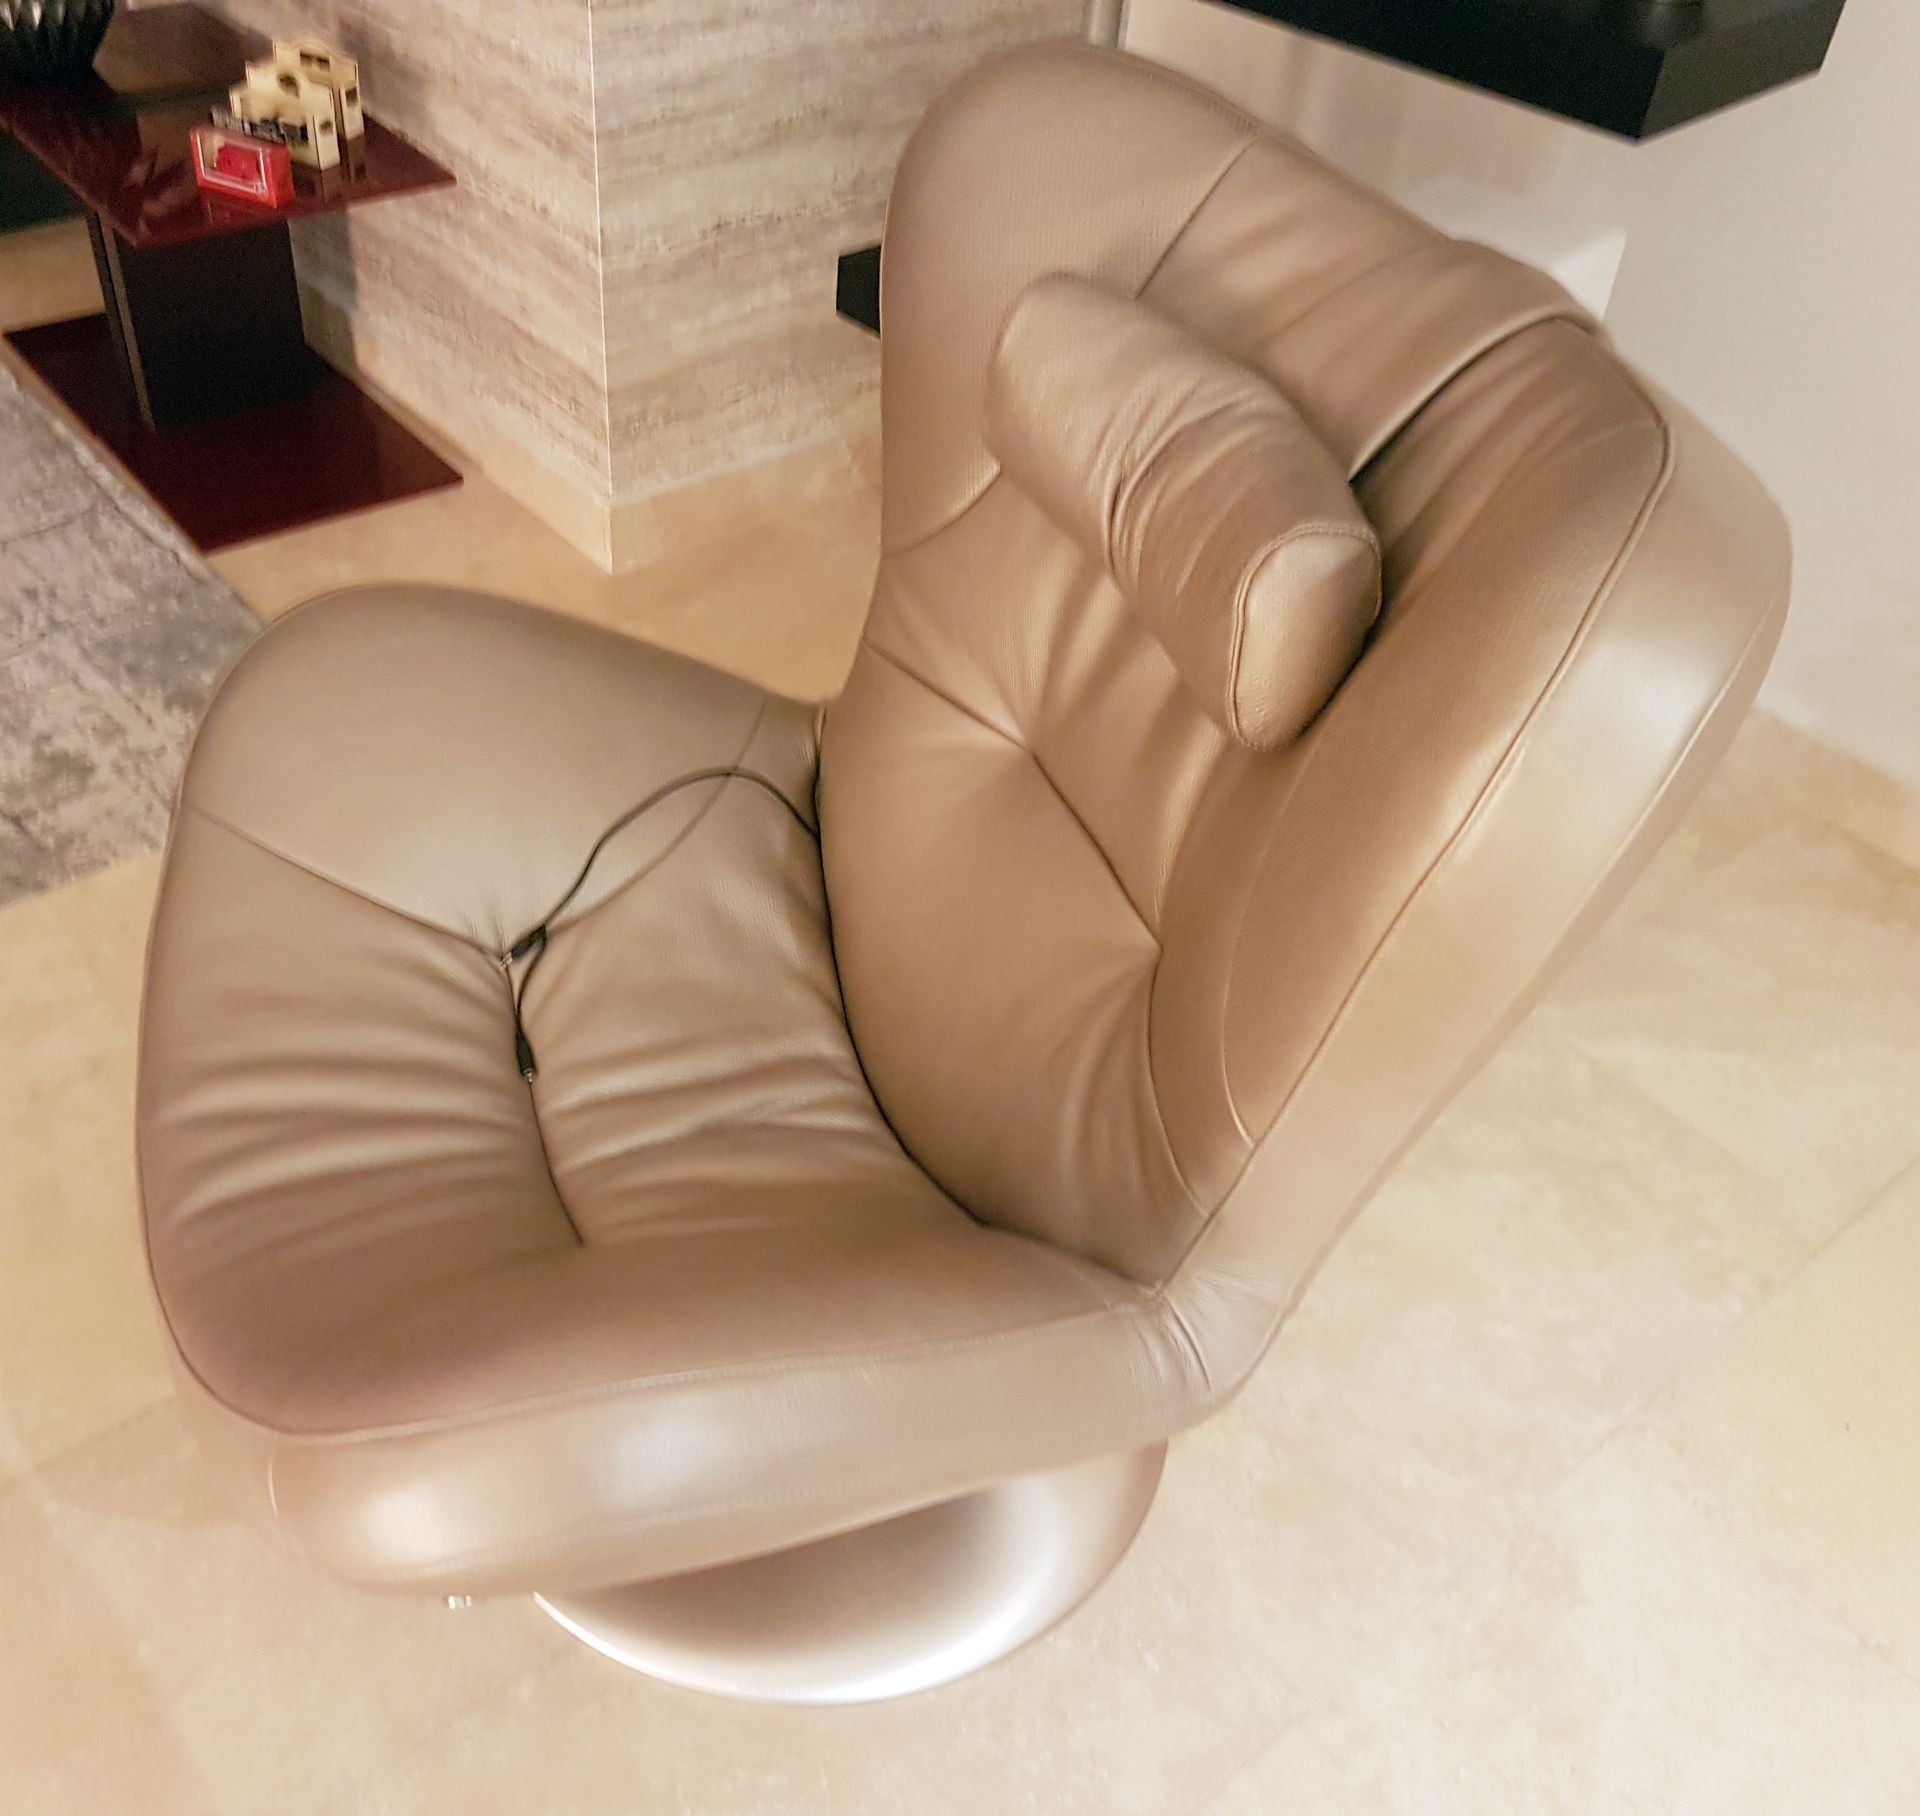 1 x Natuzzi Leather Upholstered Swivel Chair With In-built Speakers - Ref: MT643 - Stunning Chair In